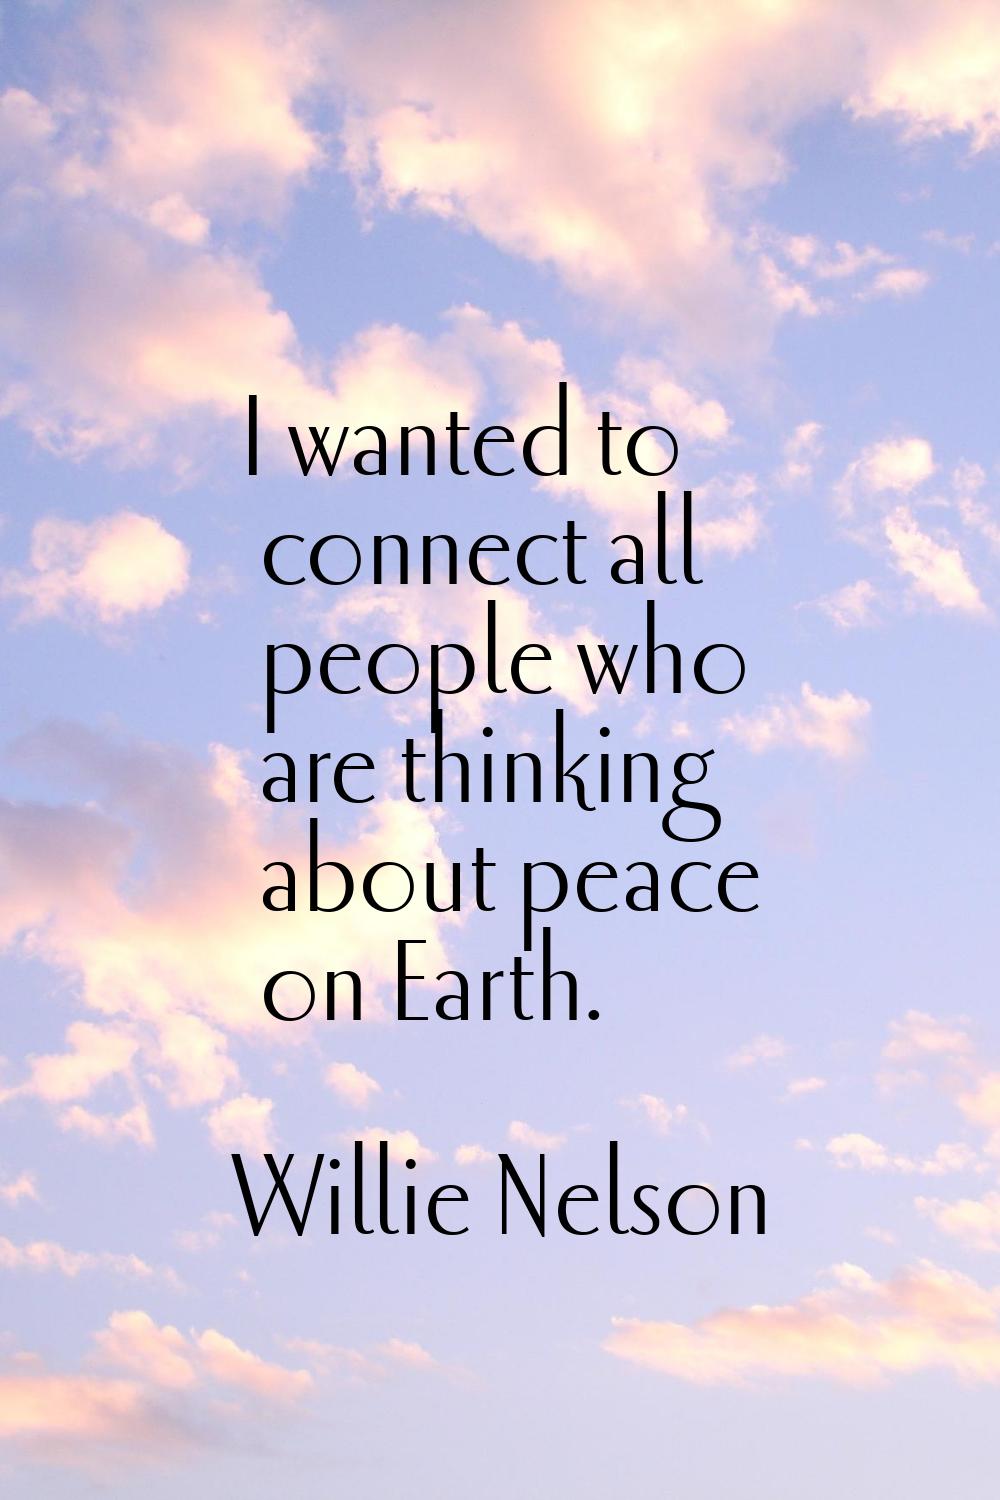 I wanted to connect all people who are thinking about peace on Earth.